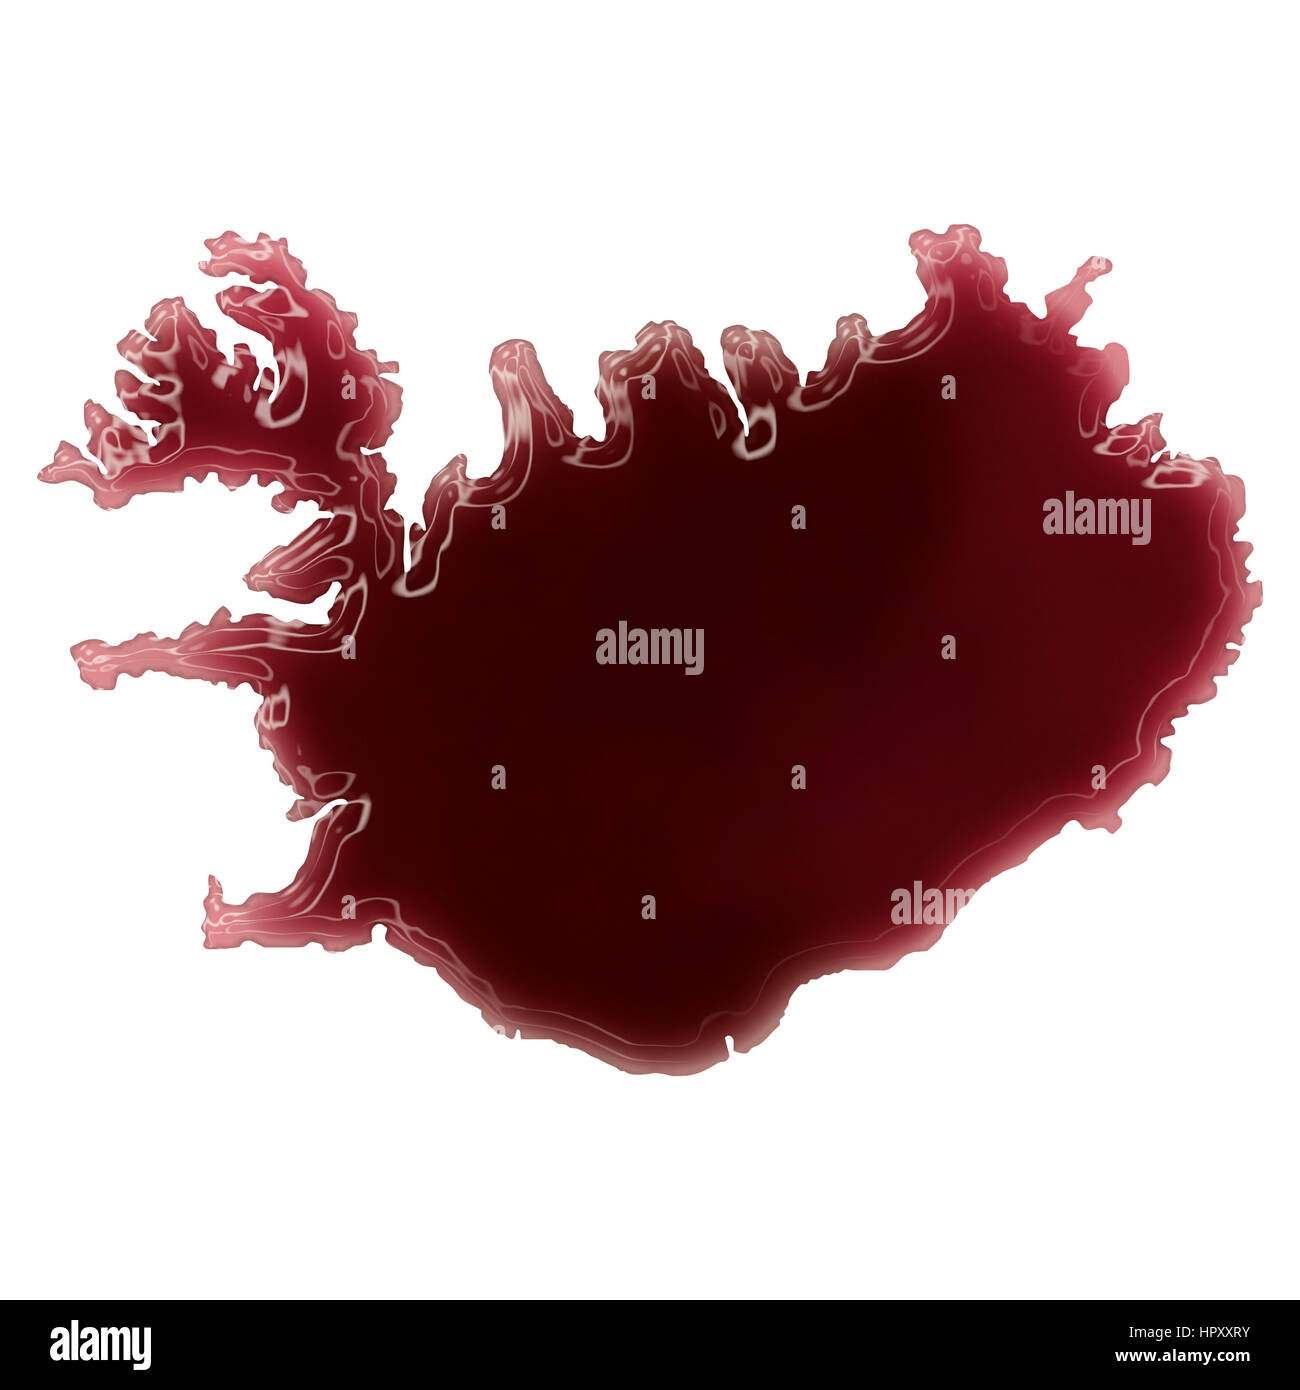 Pool of blood (or wine) that formed the shape of Iceland. (series) Stock Photo